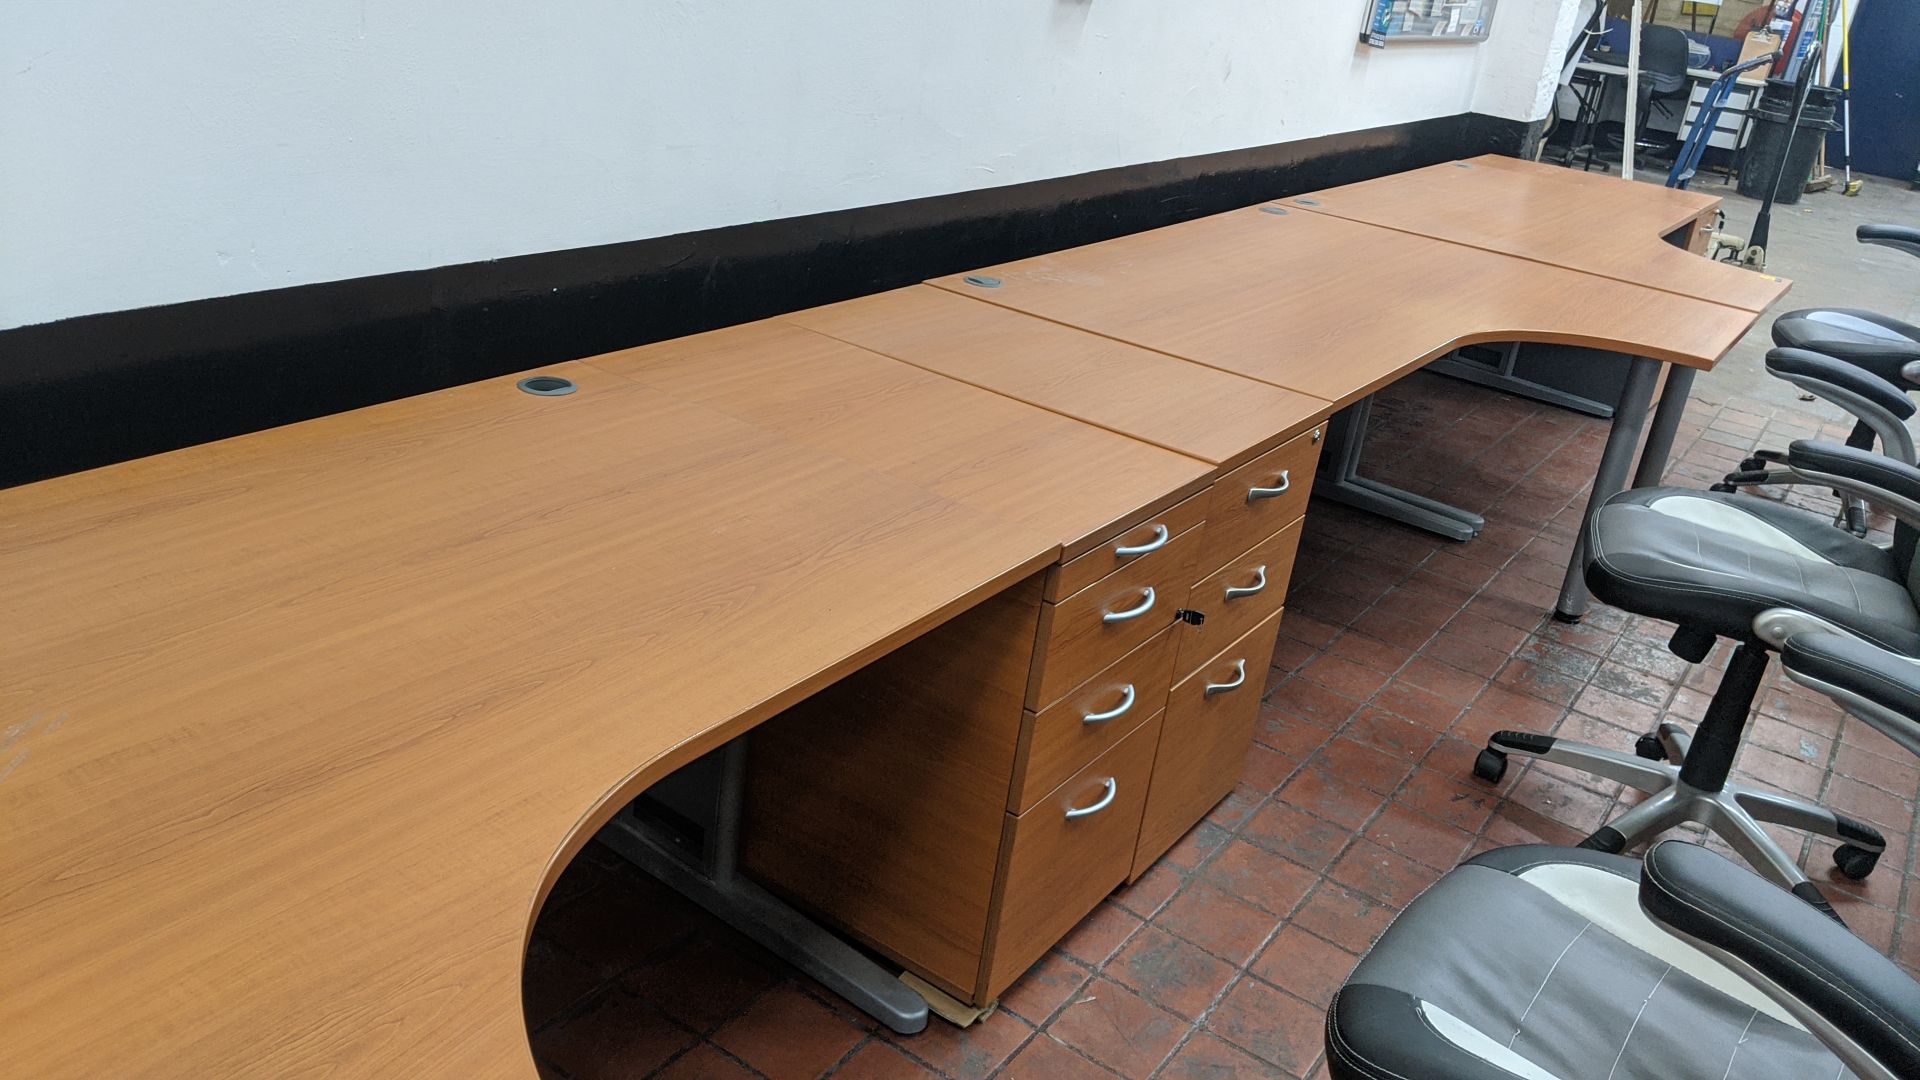 3 off curve front "piano" desks each including a matching desk height pedestal. This is one of a - Image 7 of 8